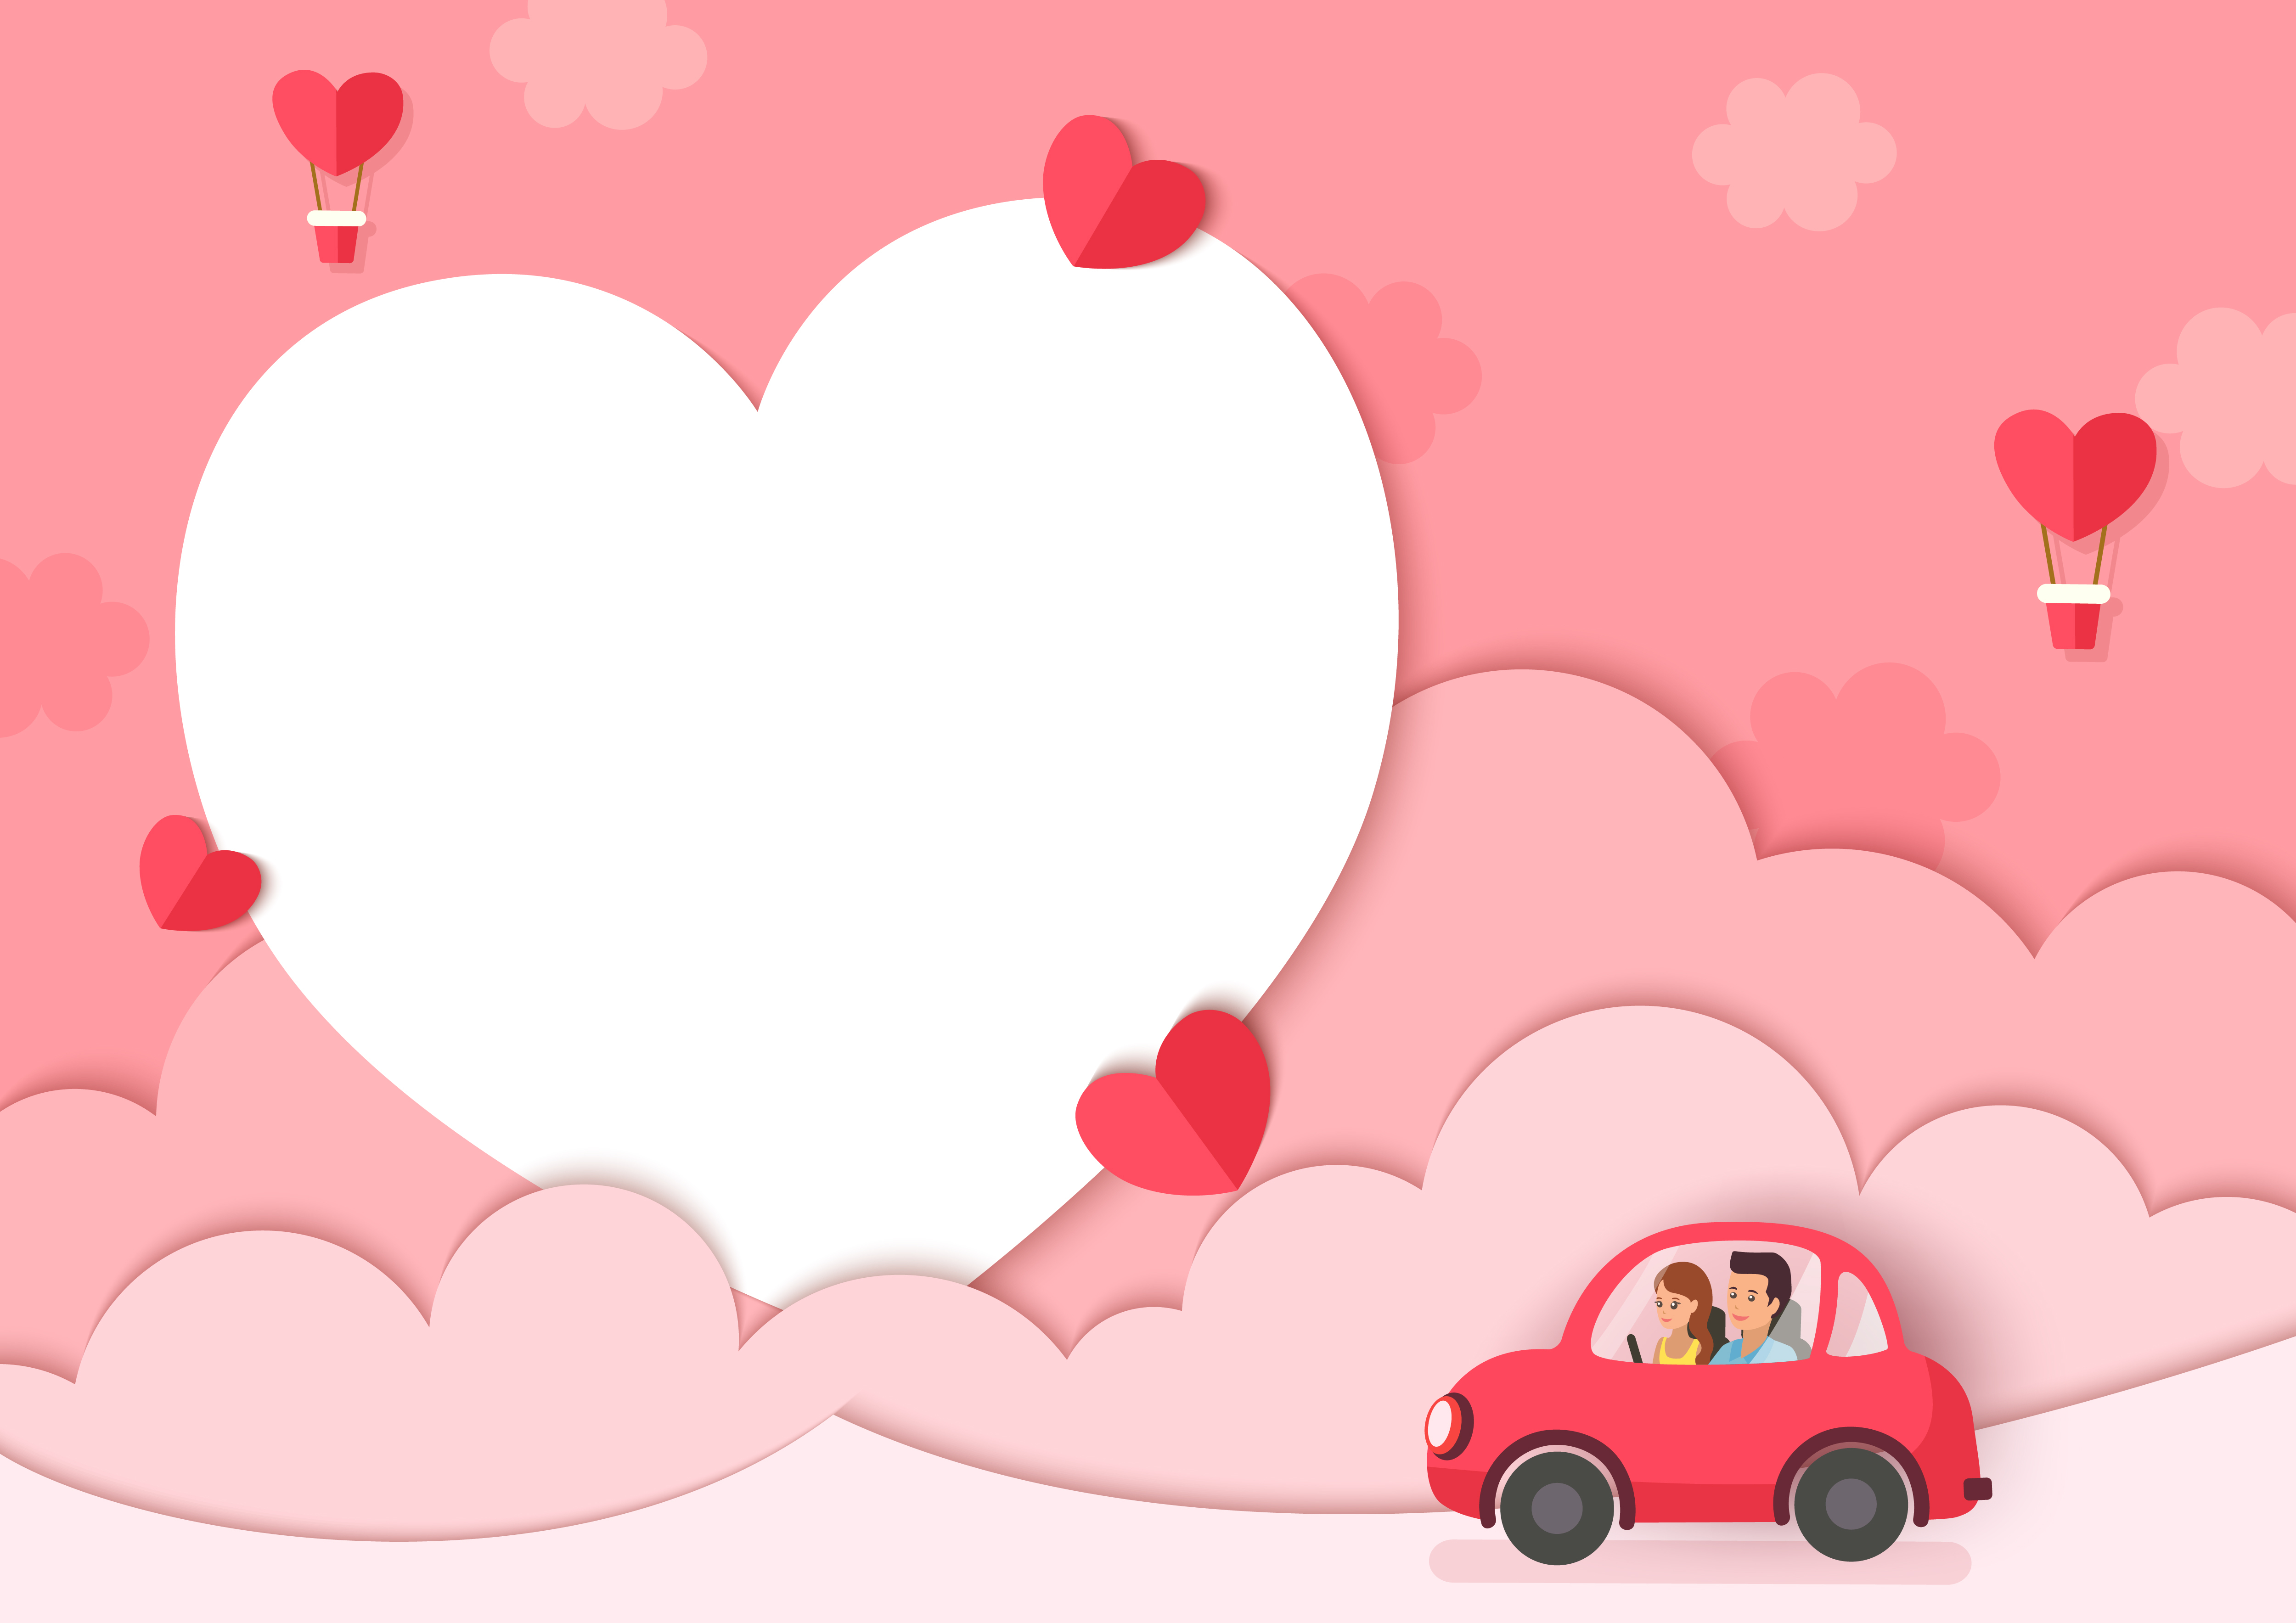 Illustration of lover on car with pink background and heart frame